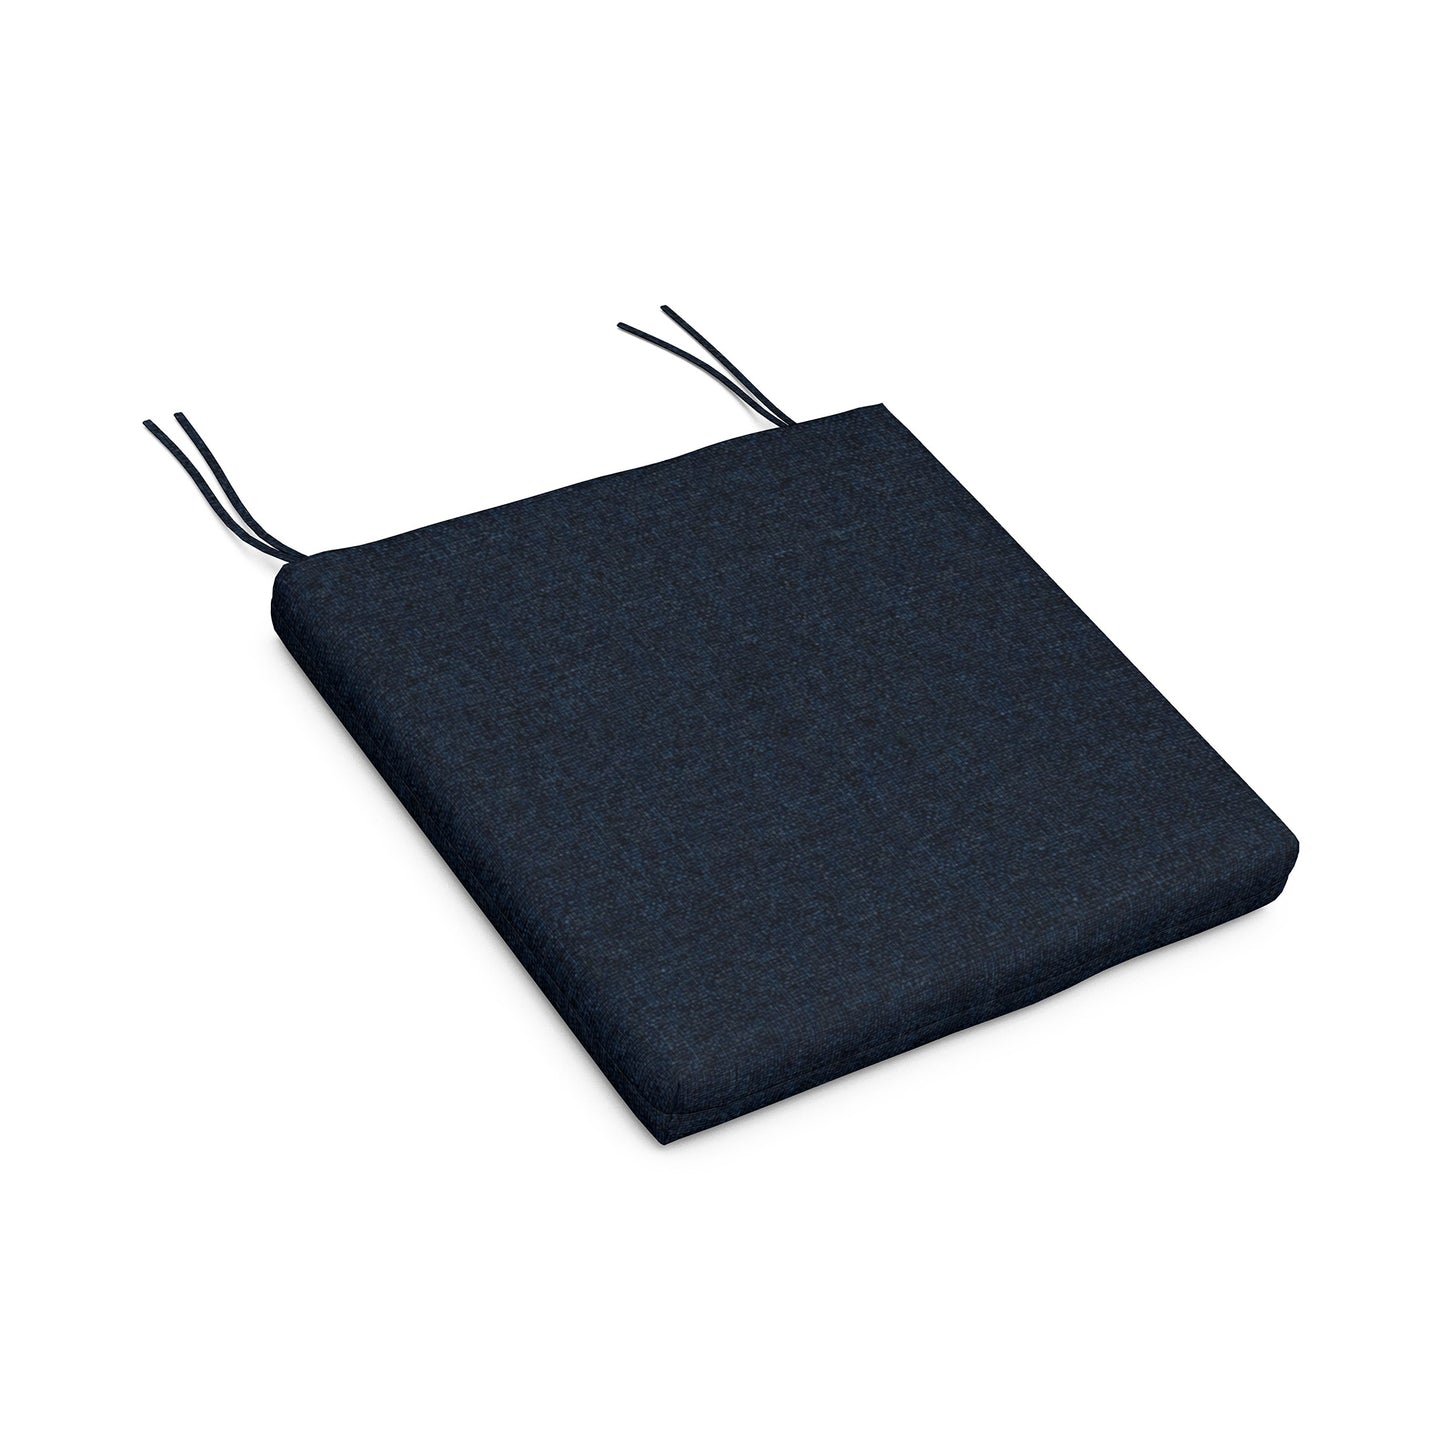 Dark blue square XPWS0183 seat cushion with weather-resistant upholstery fabric and two black ties on a white background. Brand: POLYWOOD